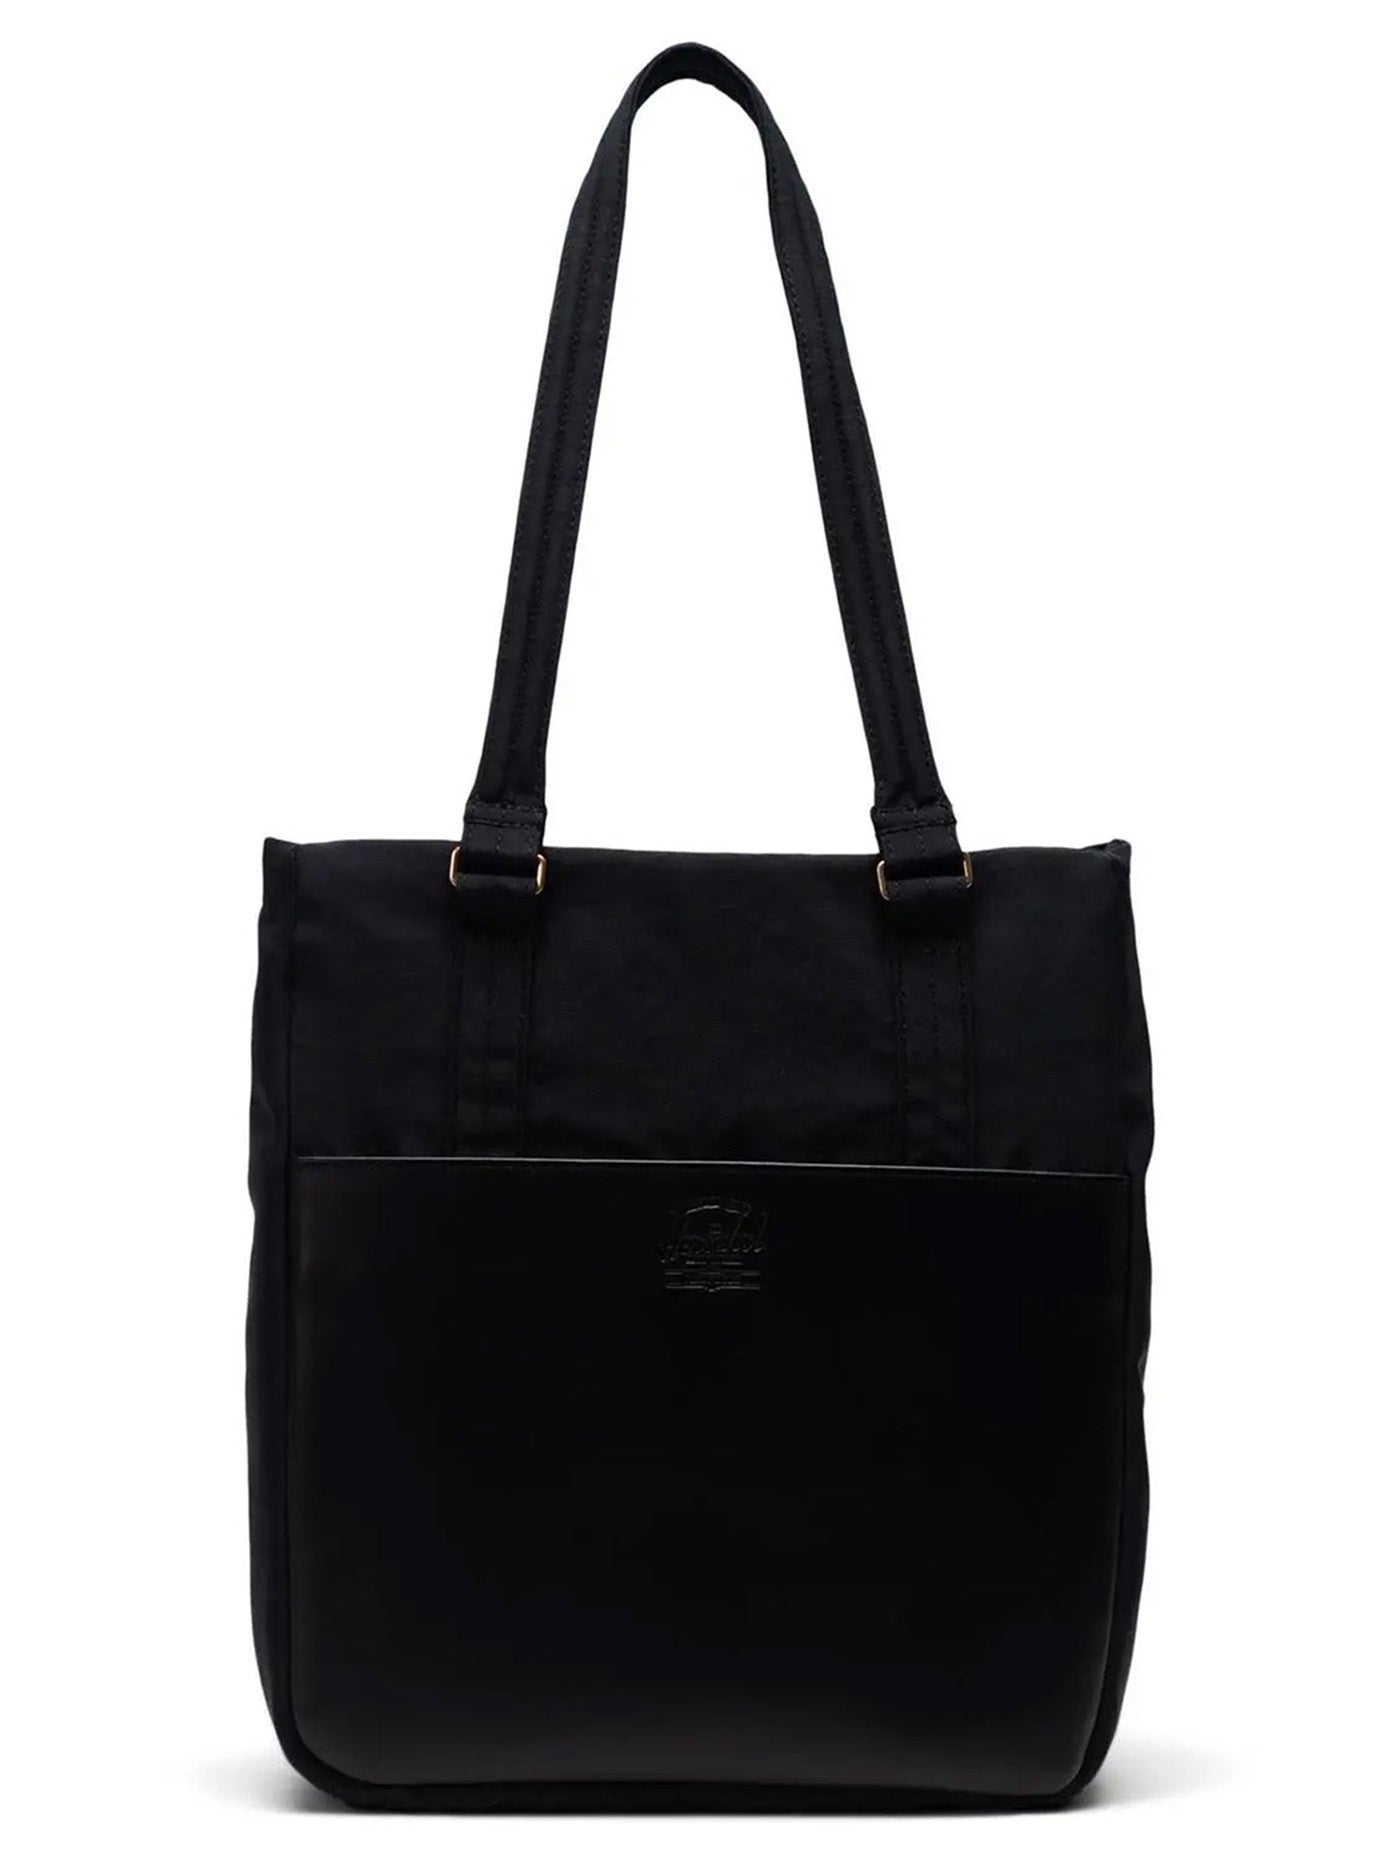 Herschel Small Orion Tote Bag